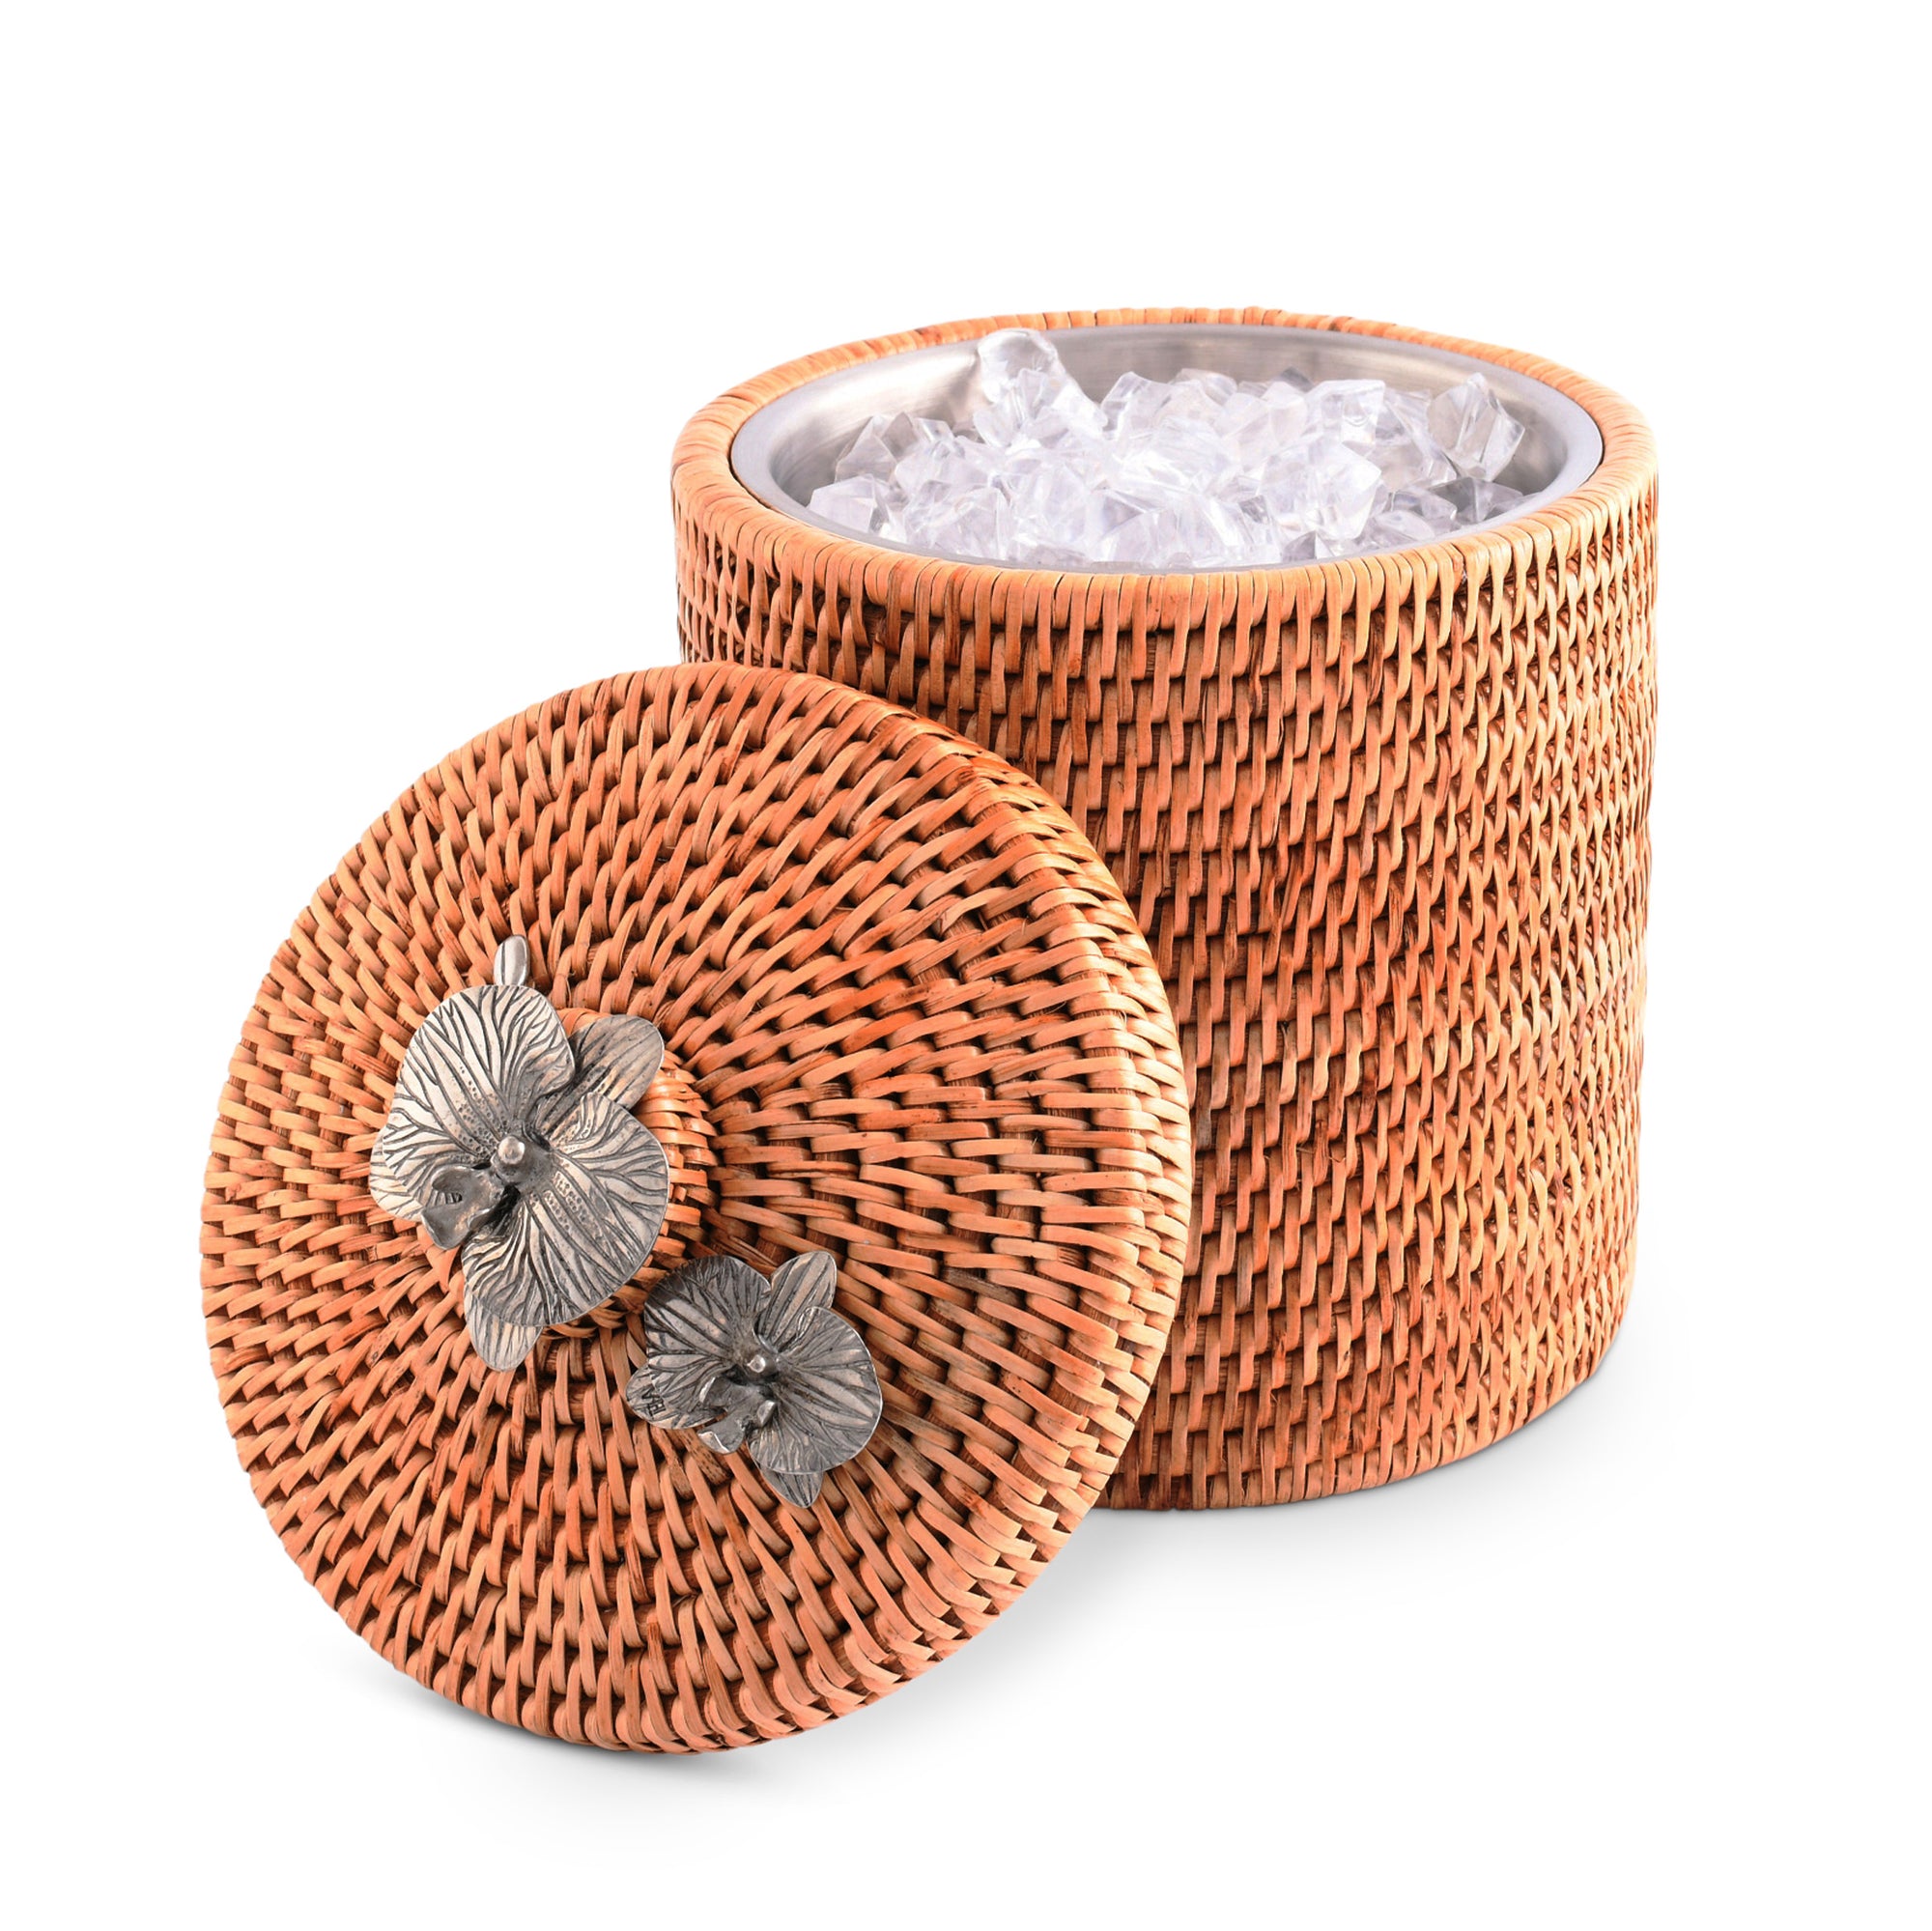 Vagabond House Orchids Hand Woven Wicker Rattan Lidded Ice Bucket Product Image